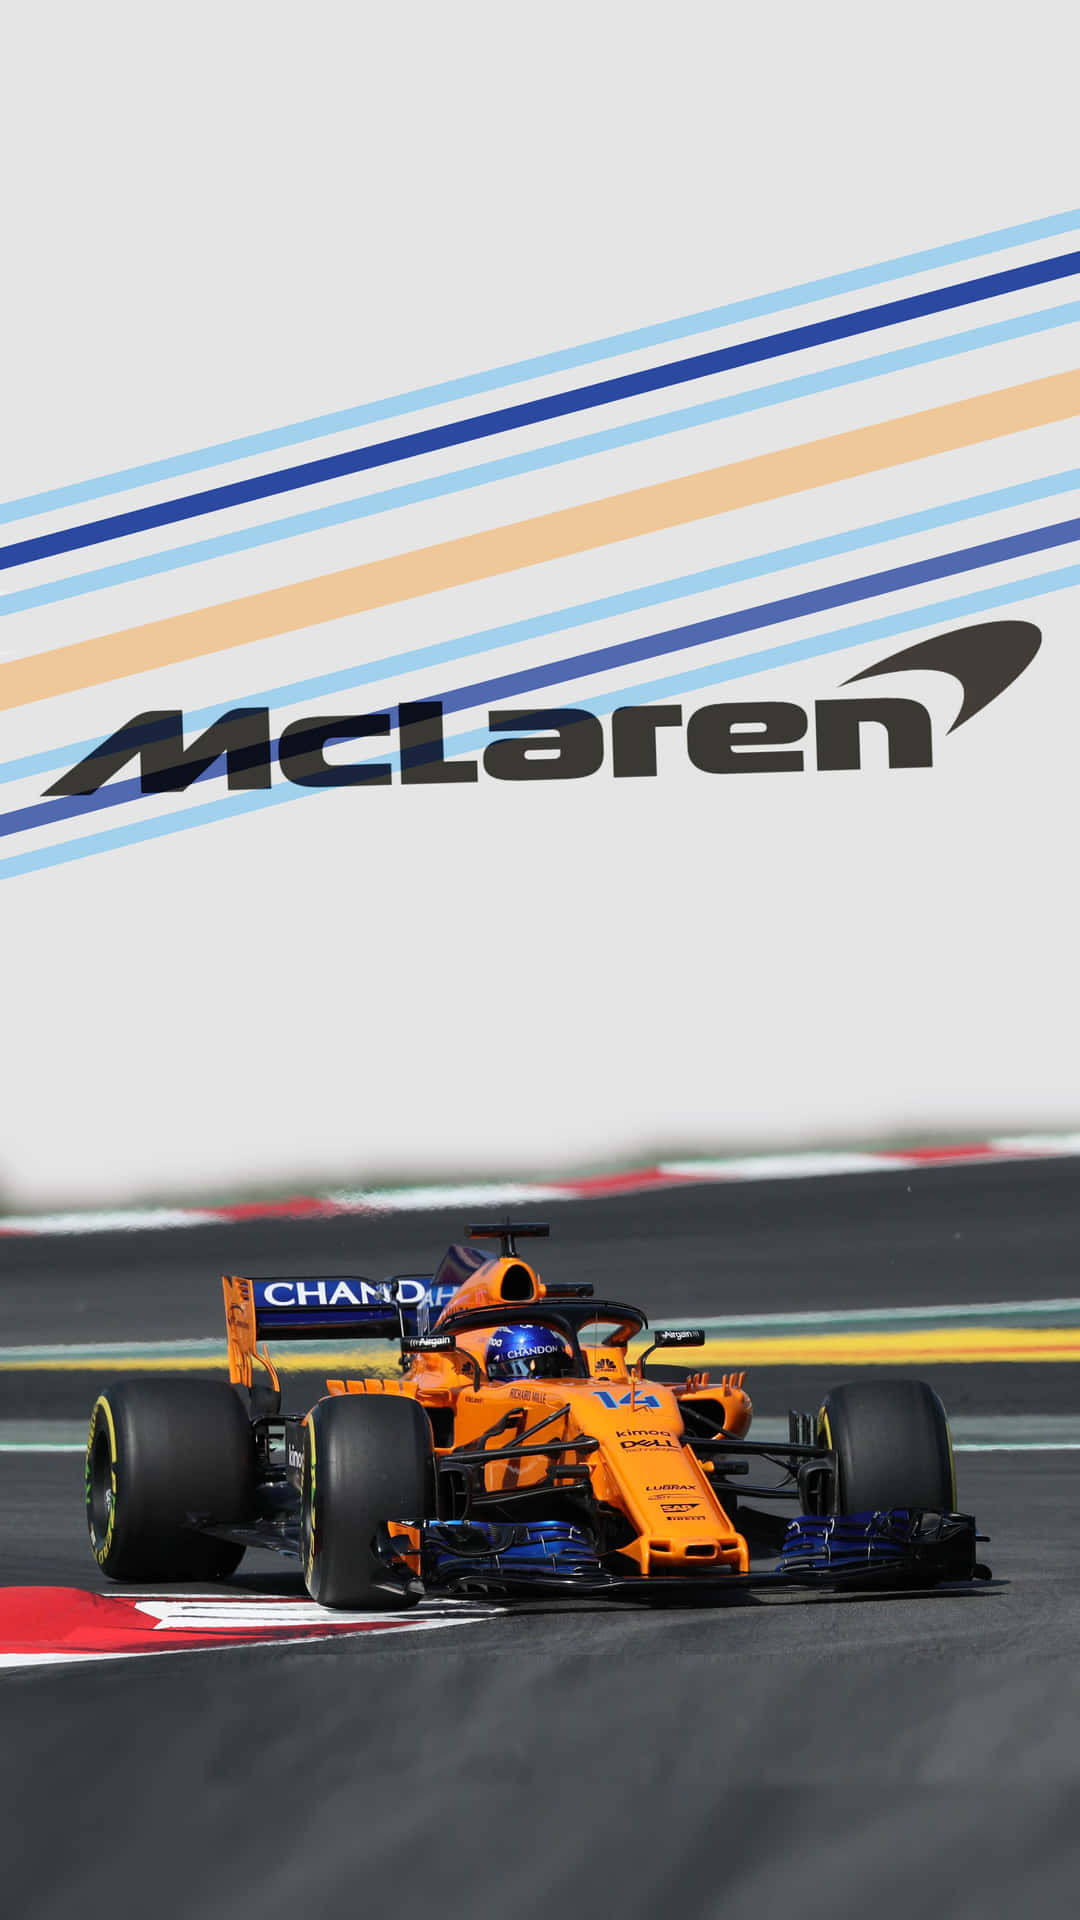 Experience the thrill of Formula 1 with the world-class McLaren race car Wallpaper